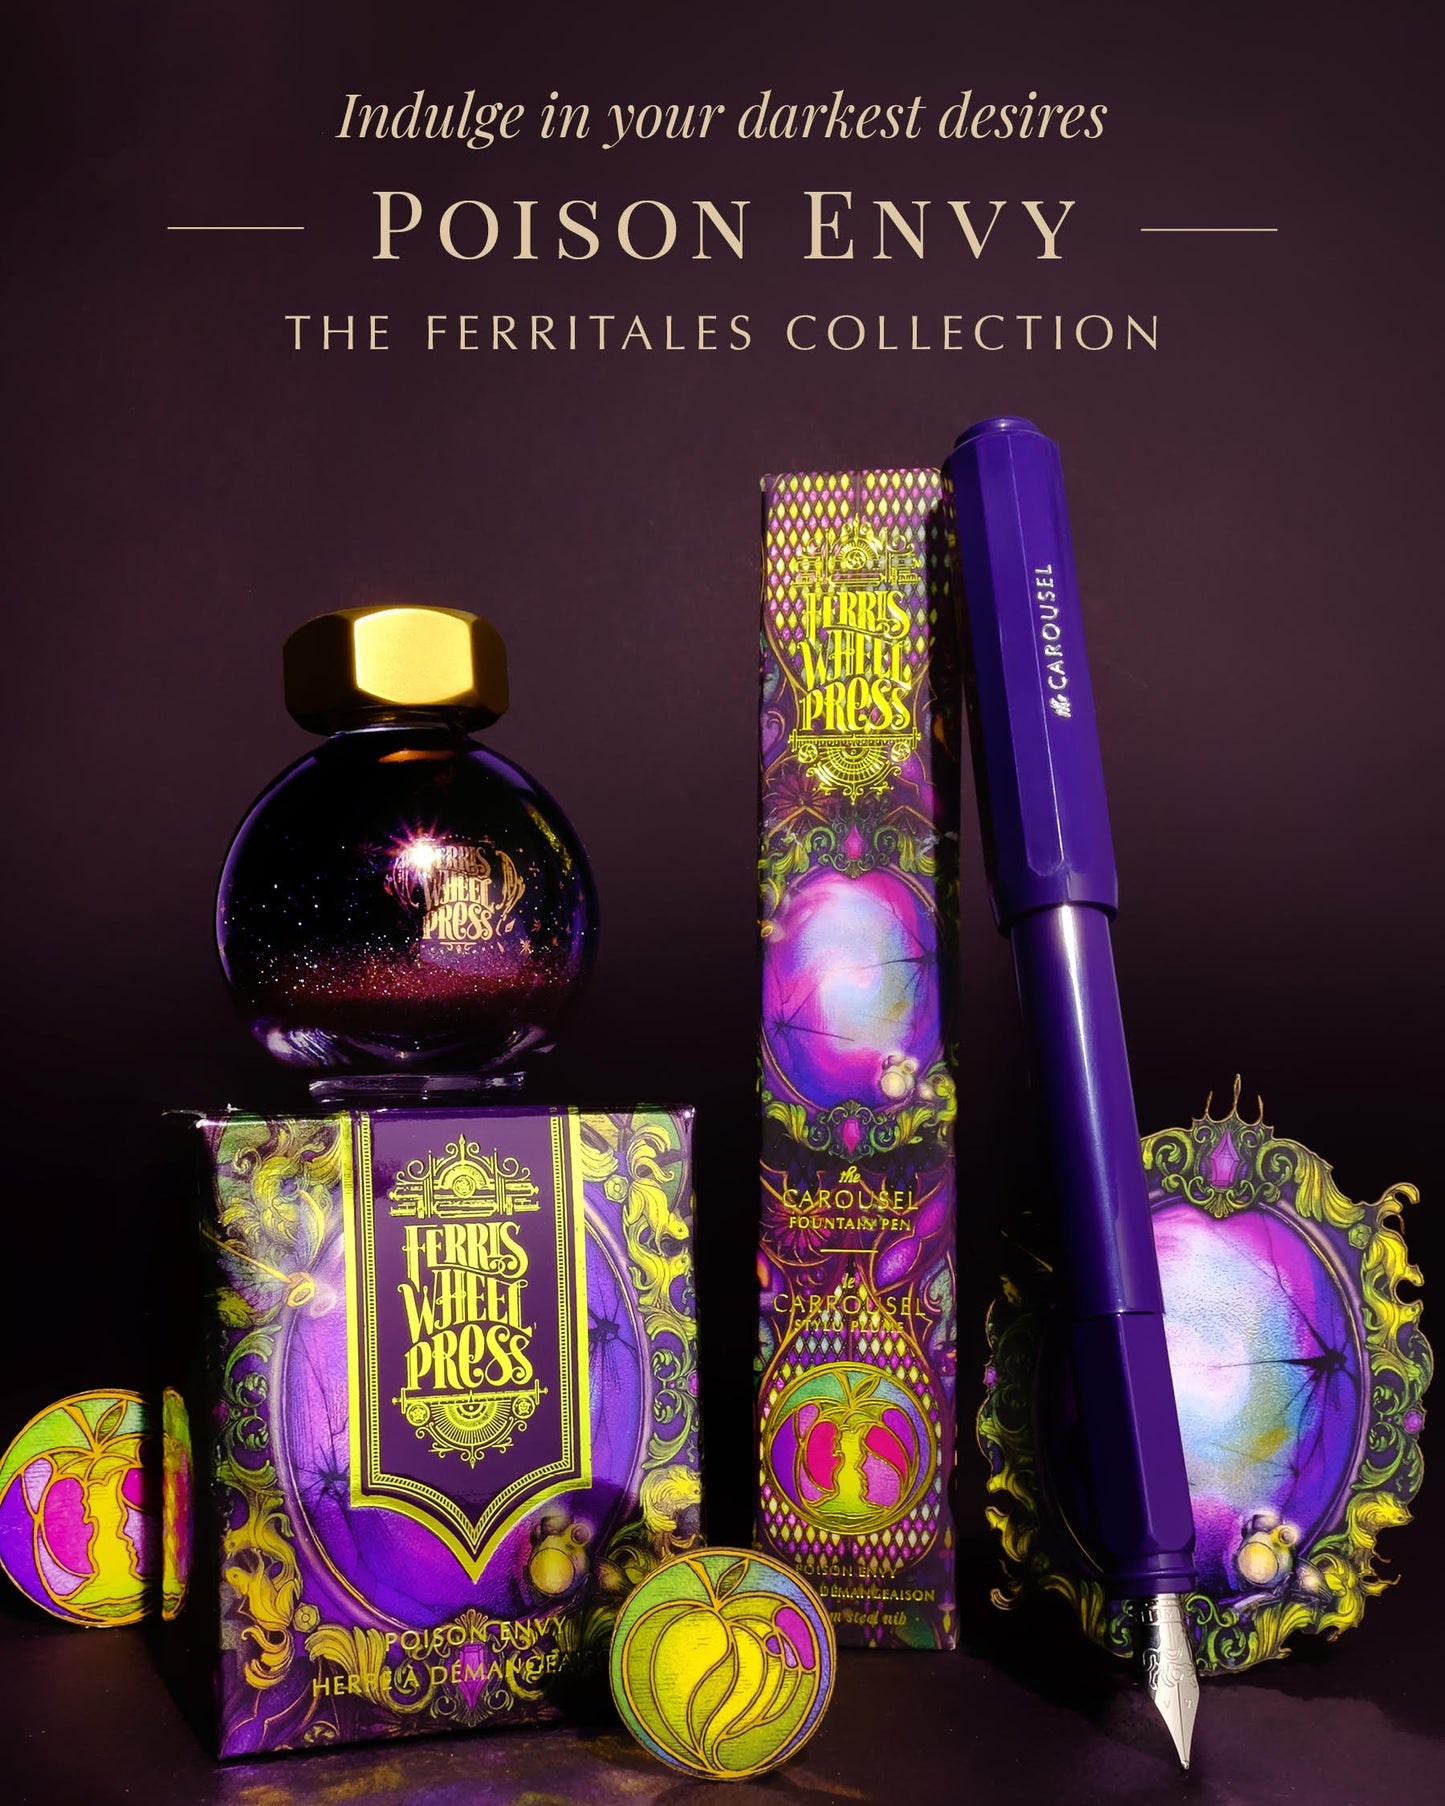 Ferris Wheel Press - Once Upon A Time... - Poison Envy Ink 20 ml